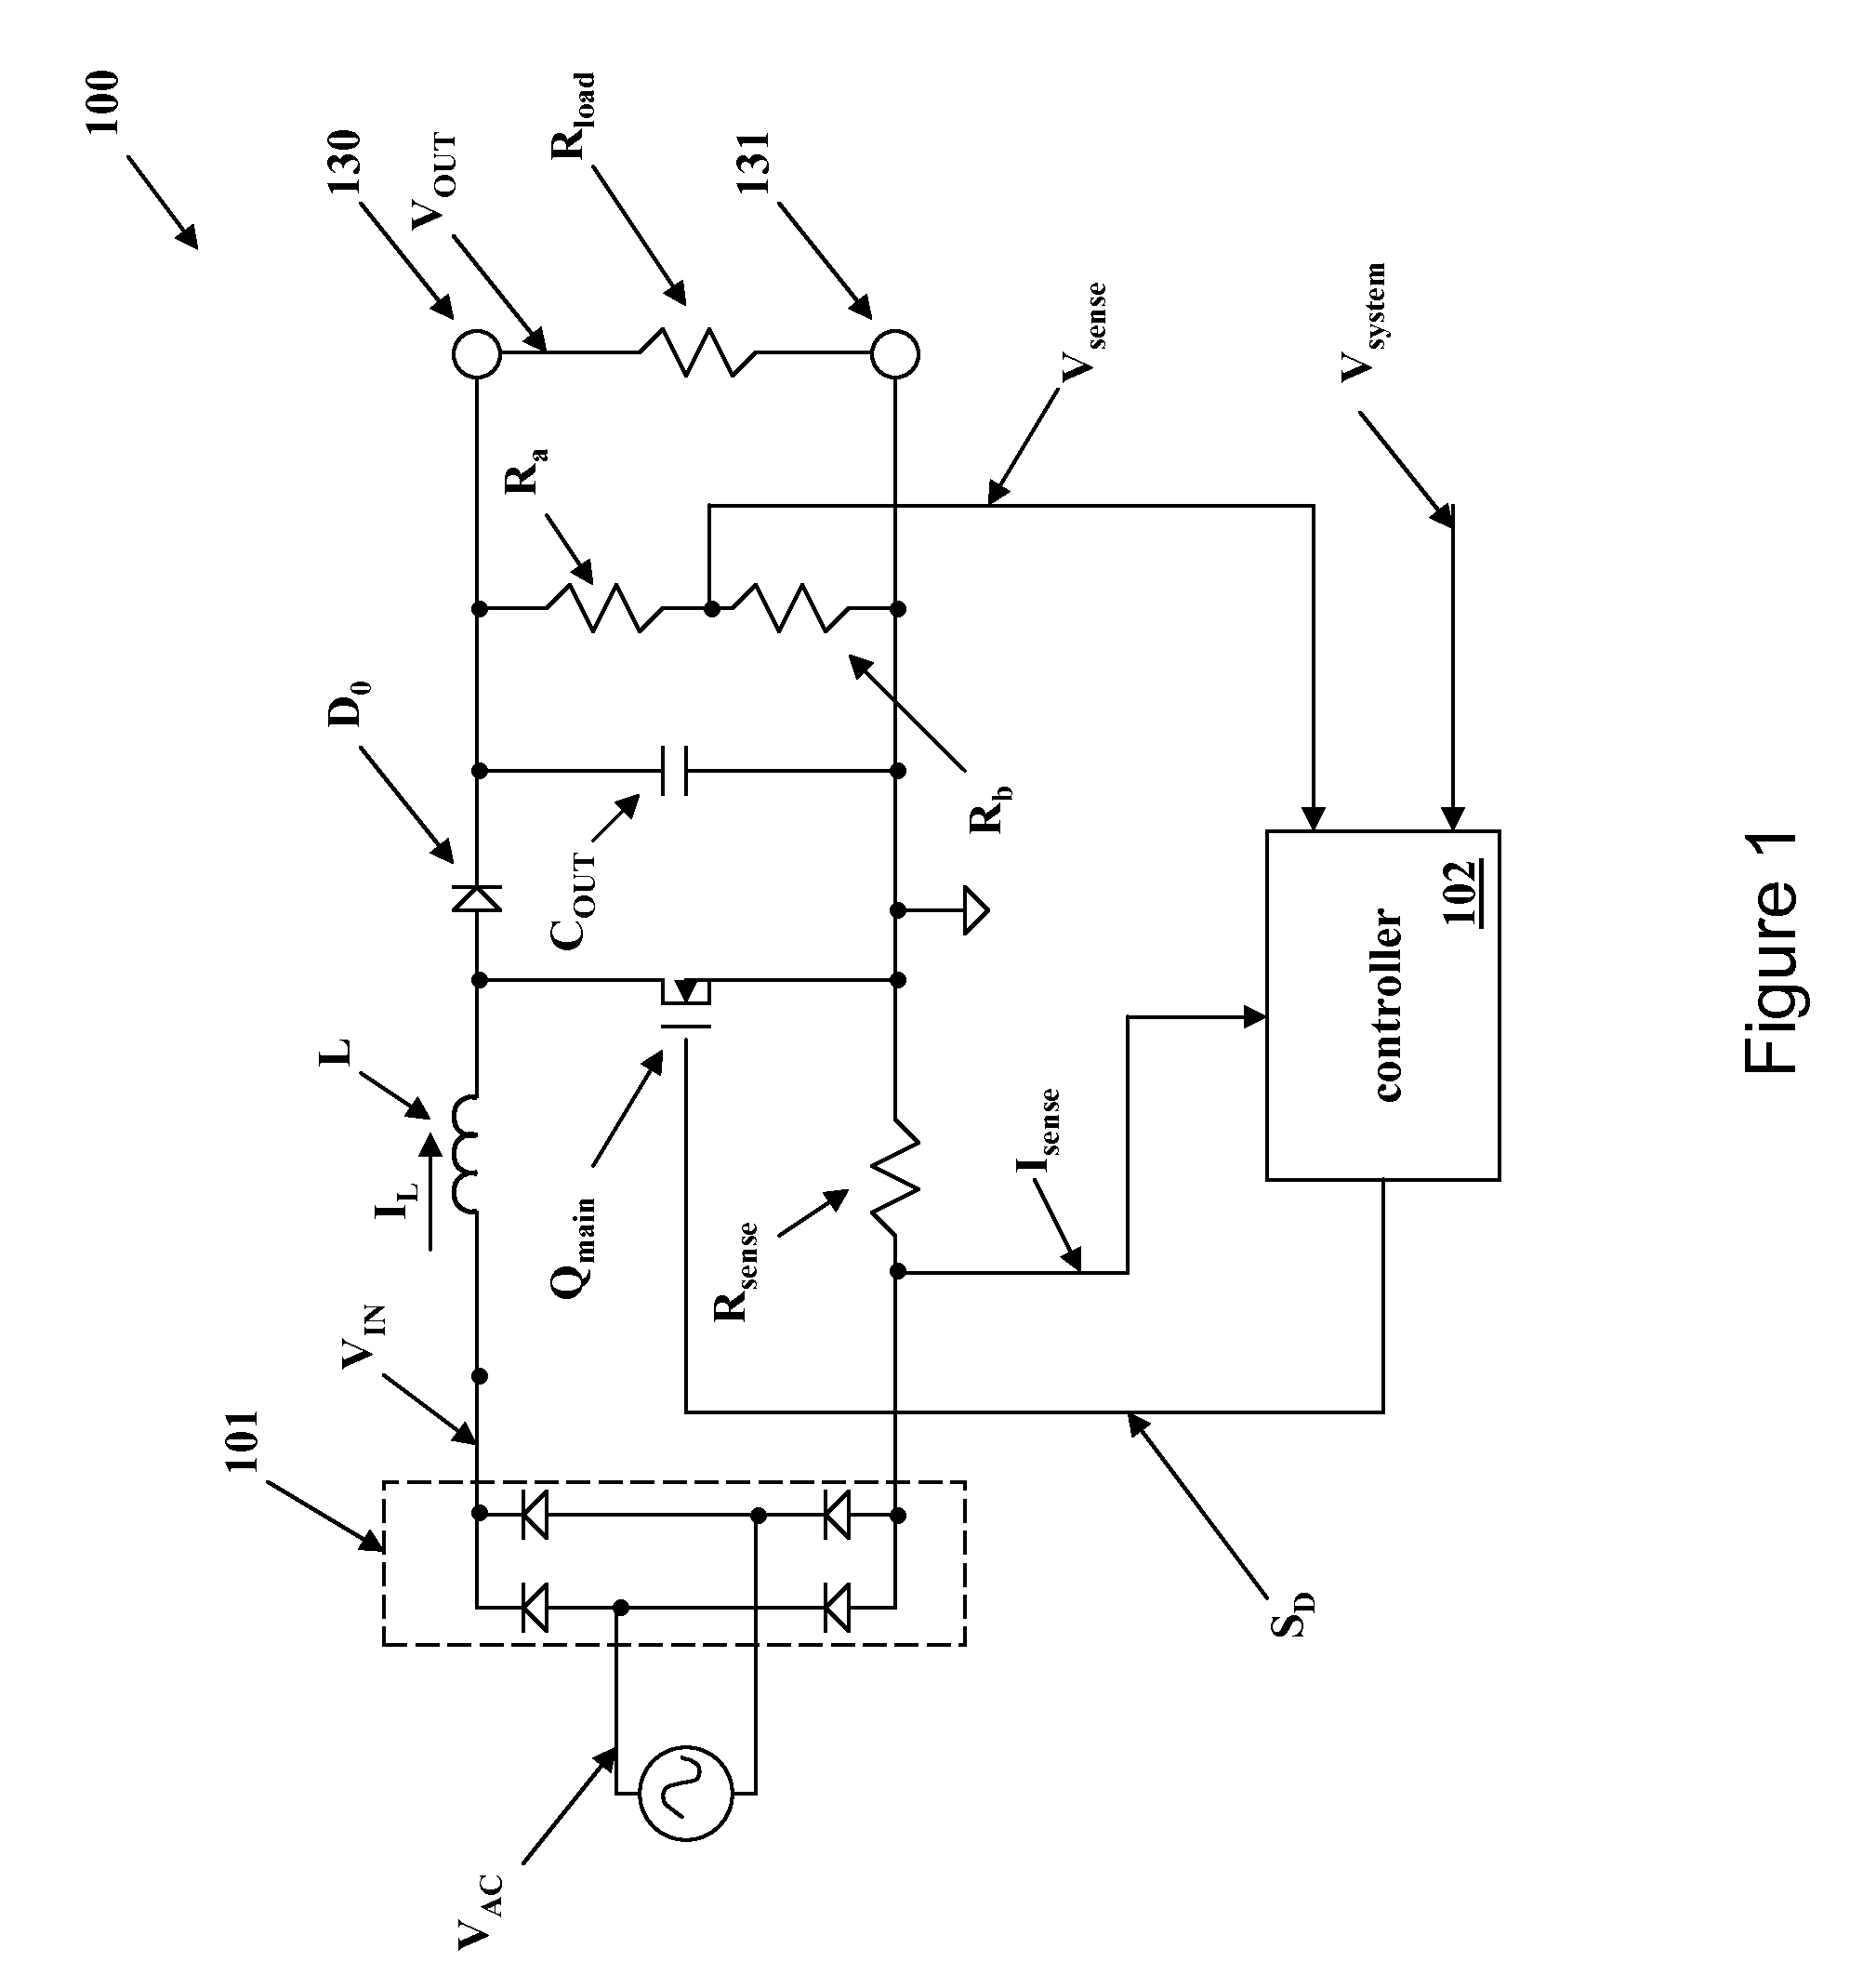 Utilization of a multifunctional pin combining voltage sensing and zero current detection to control a switched-mode power converter